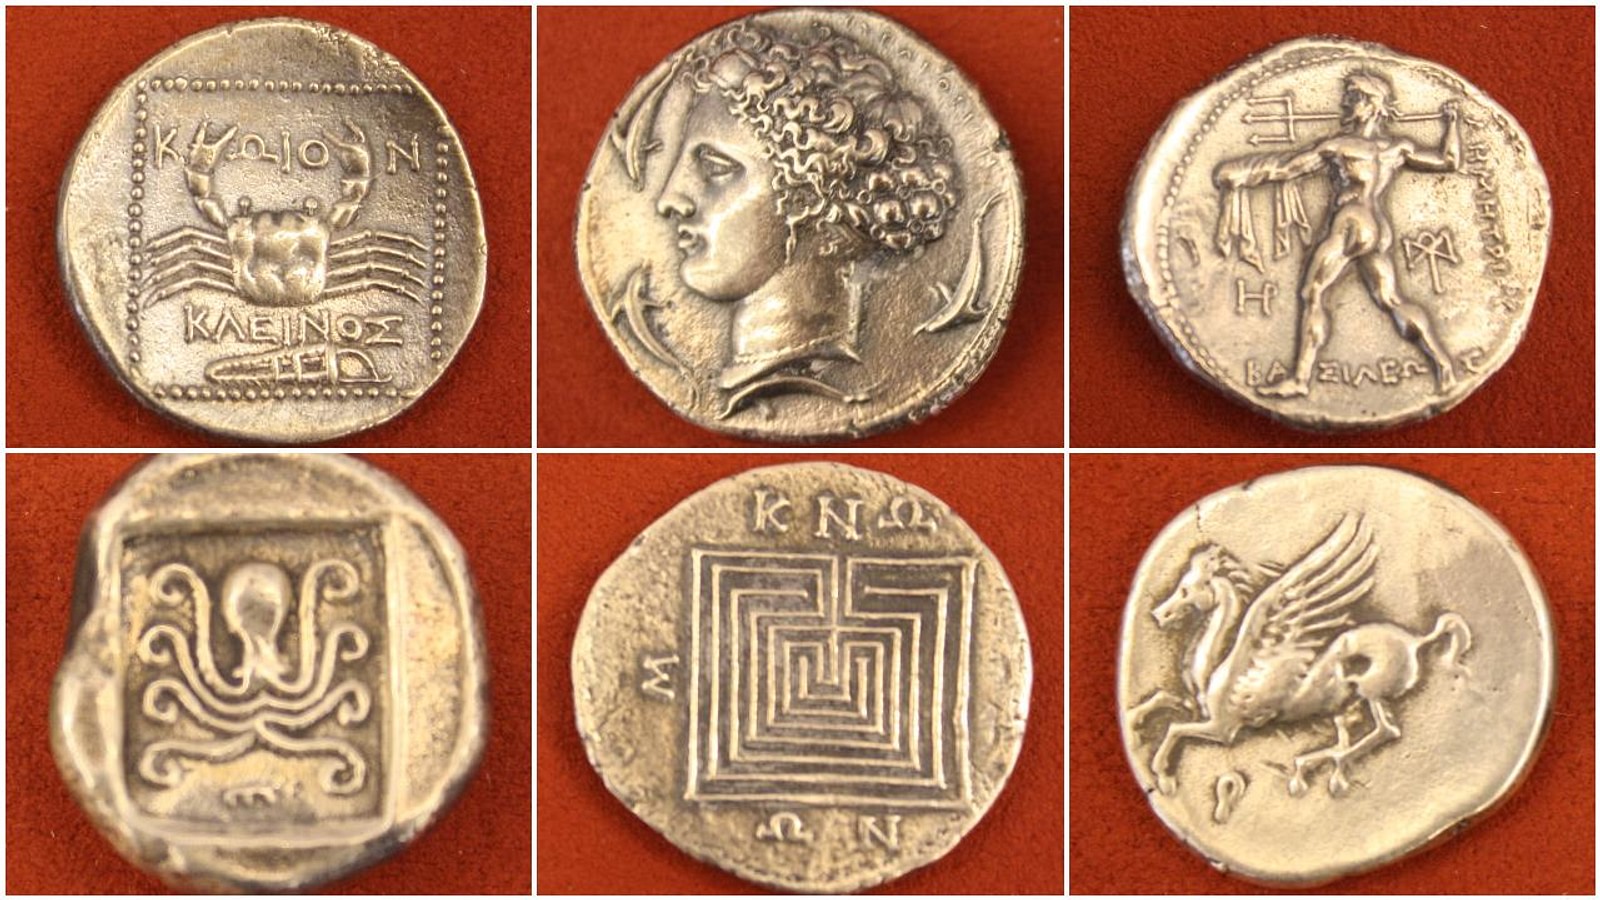 Explore and Learn the Collection Methodology of Coins, Stamps